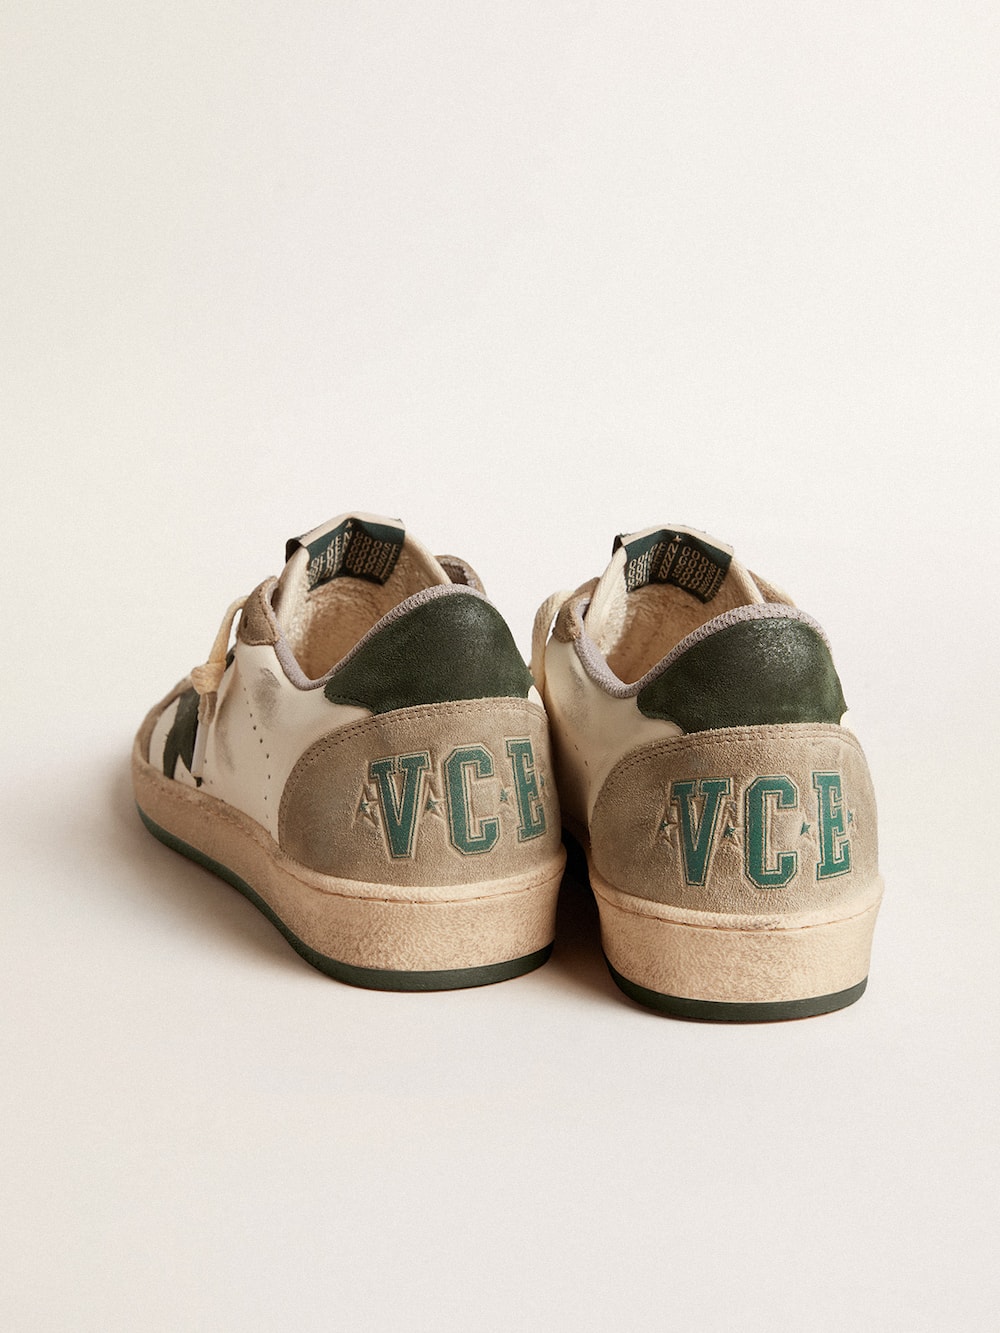 Golden Goose - Men's Ball Star LTD in nappa with green star and dove-gray suede inserts in 